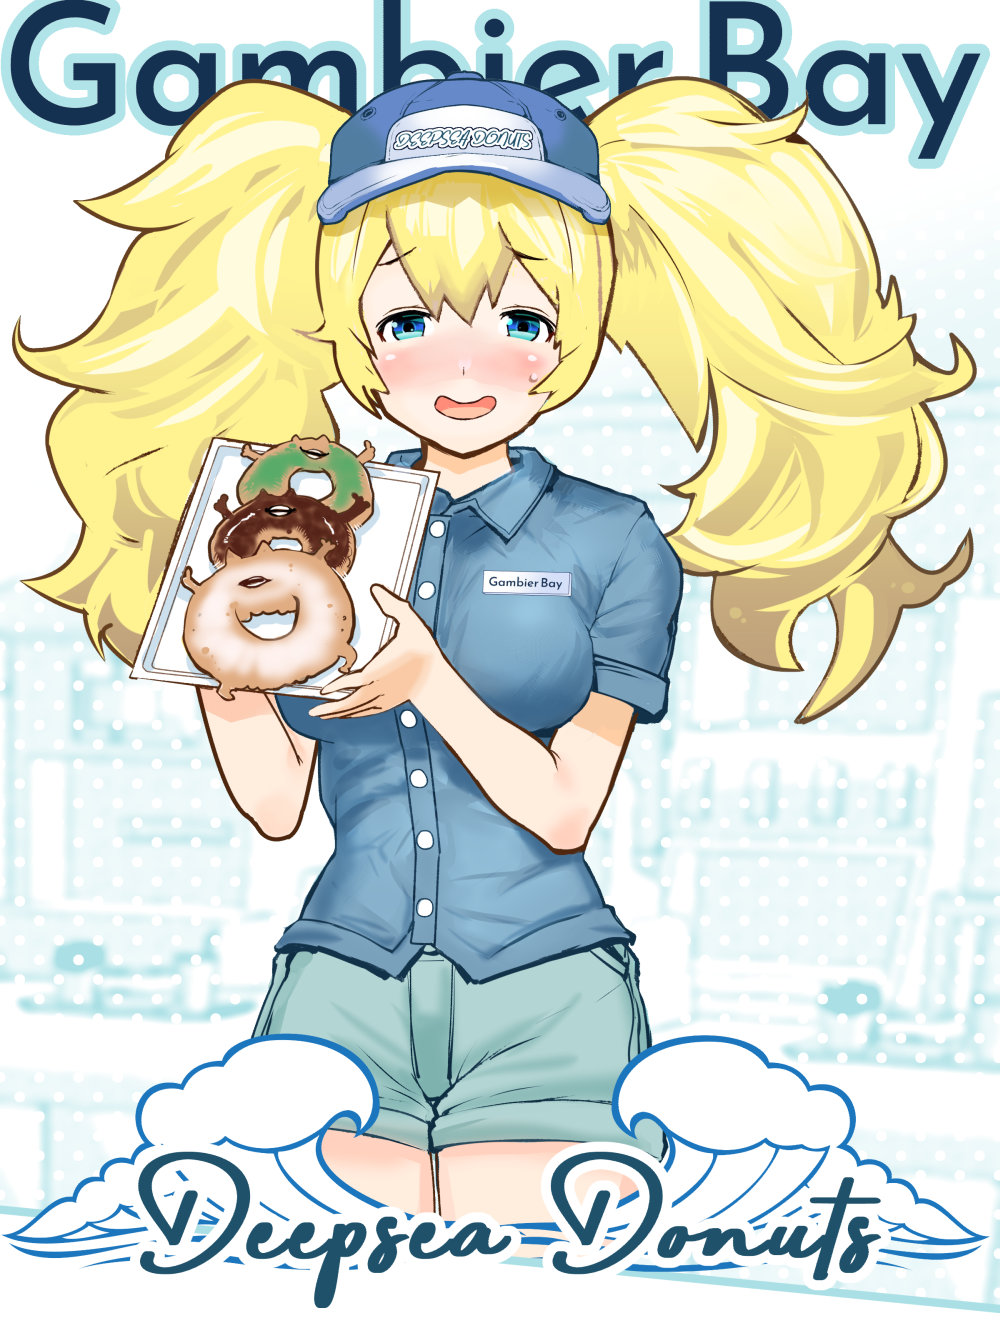 1girl abyssal_ship alternate_costume blonde_hair blue_eyes blue_headwear blue_shirt blue_shorts breasts character_name clothes_removed collared_shirt commentary_request cowboy_shot doughnut enemy_lifebuoy_(kantai_collection) food gambier_bay_(kantai_collection) hairband highres igarasy kantai_collection large_breasts looking_at_viewer name_tag shirt shorts smile solo twintails